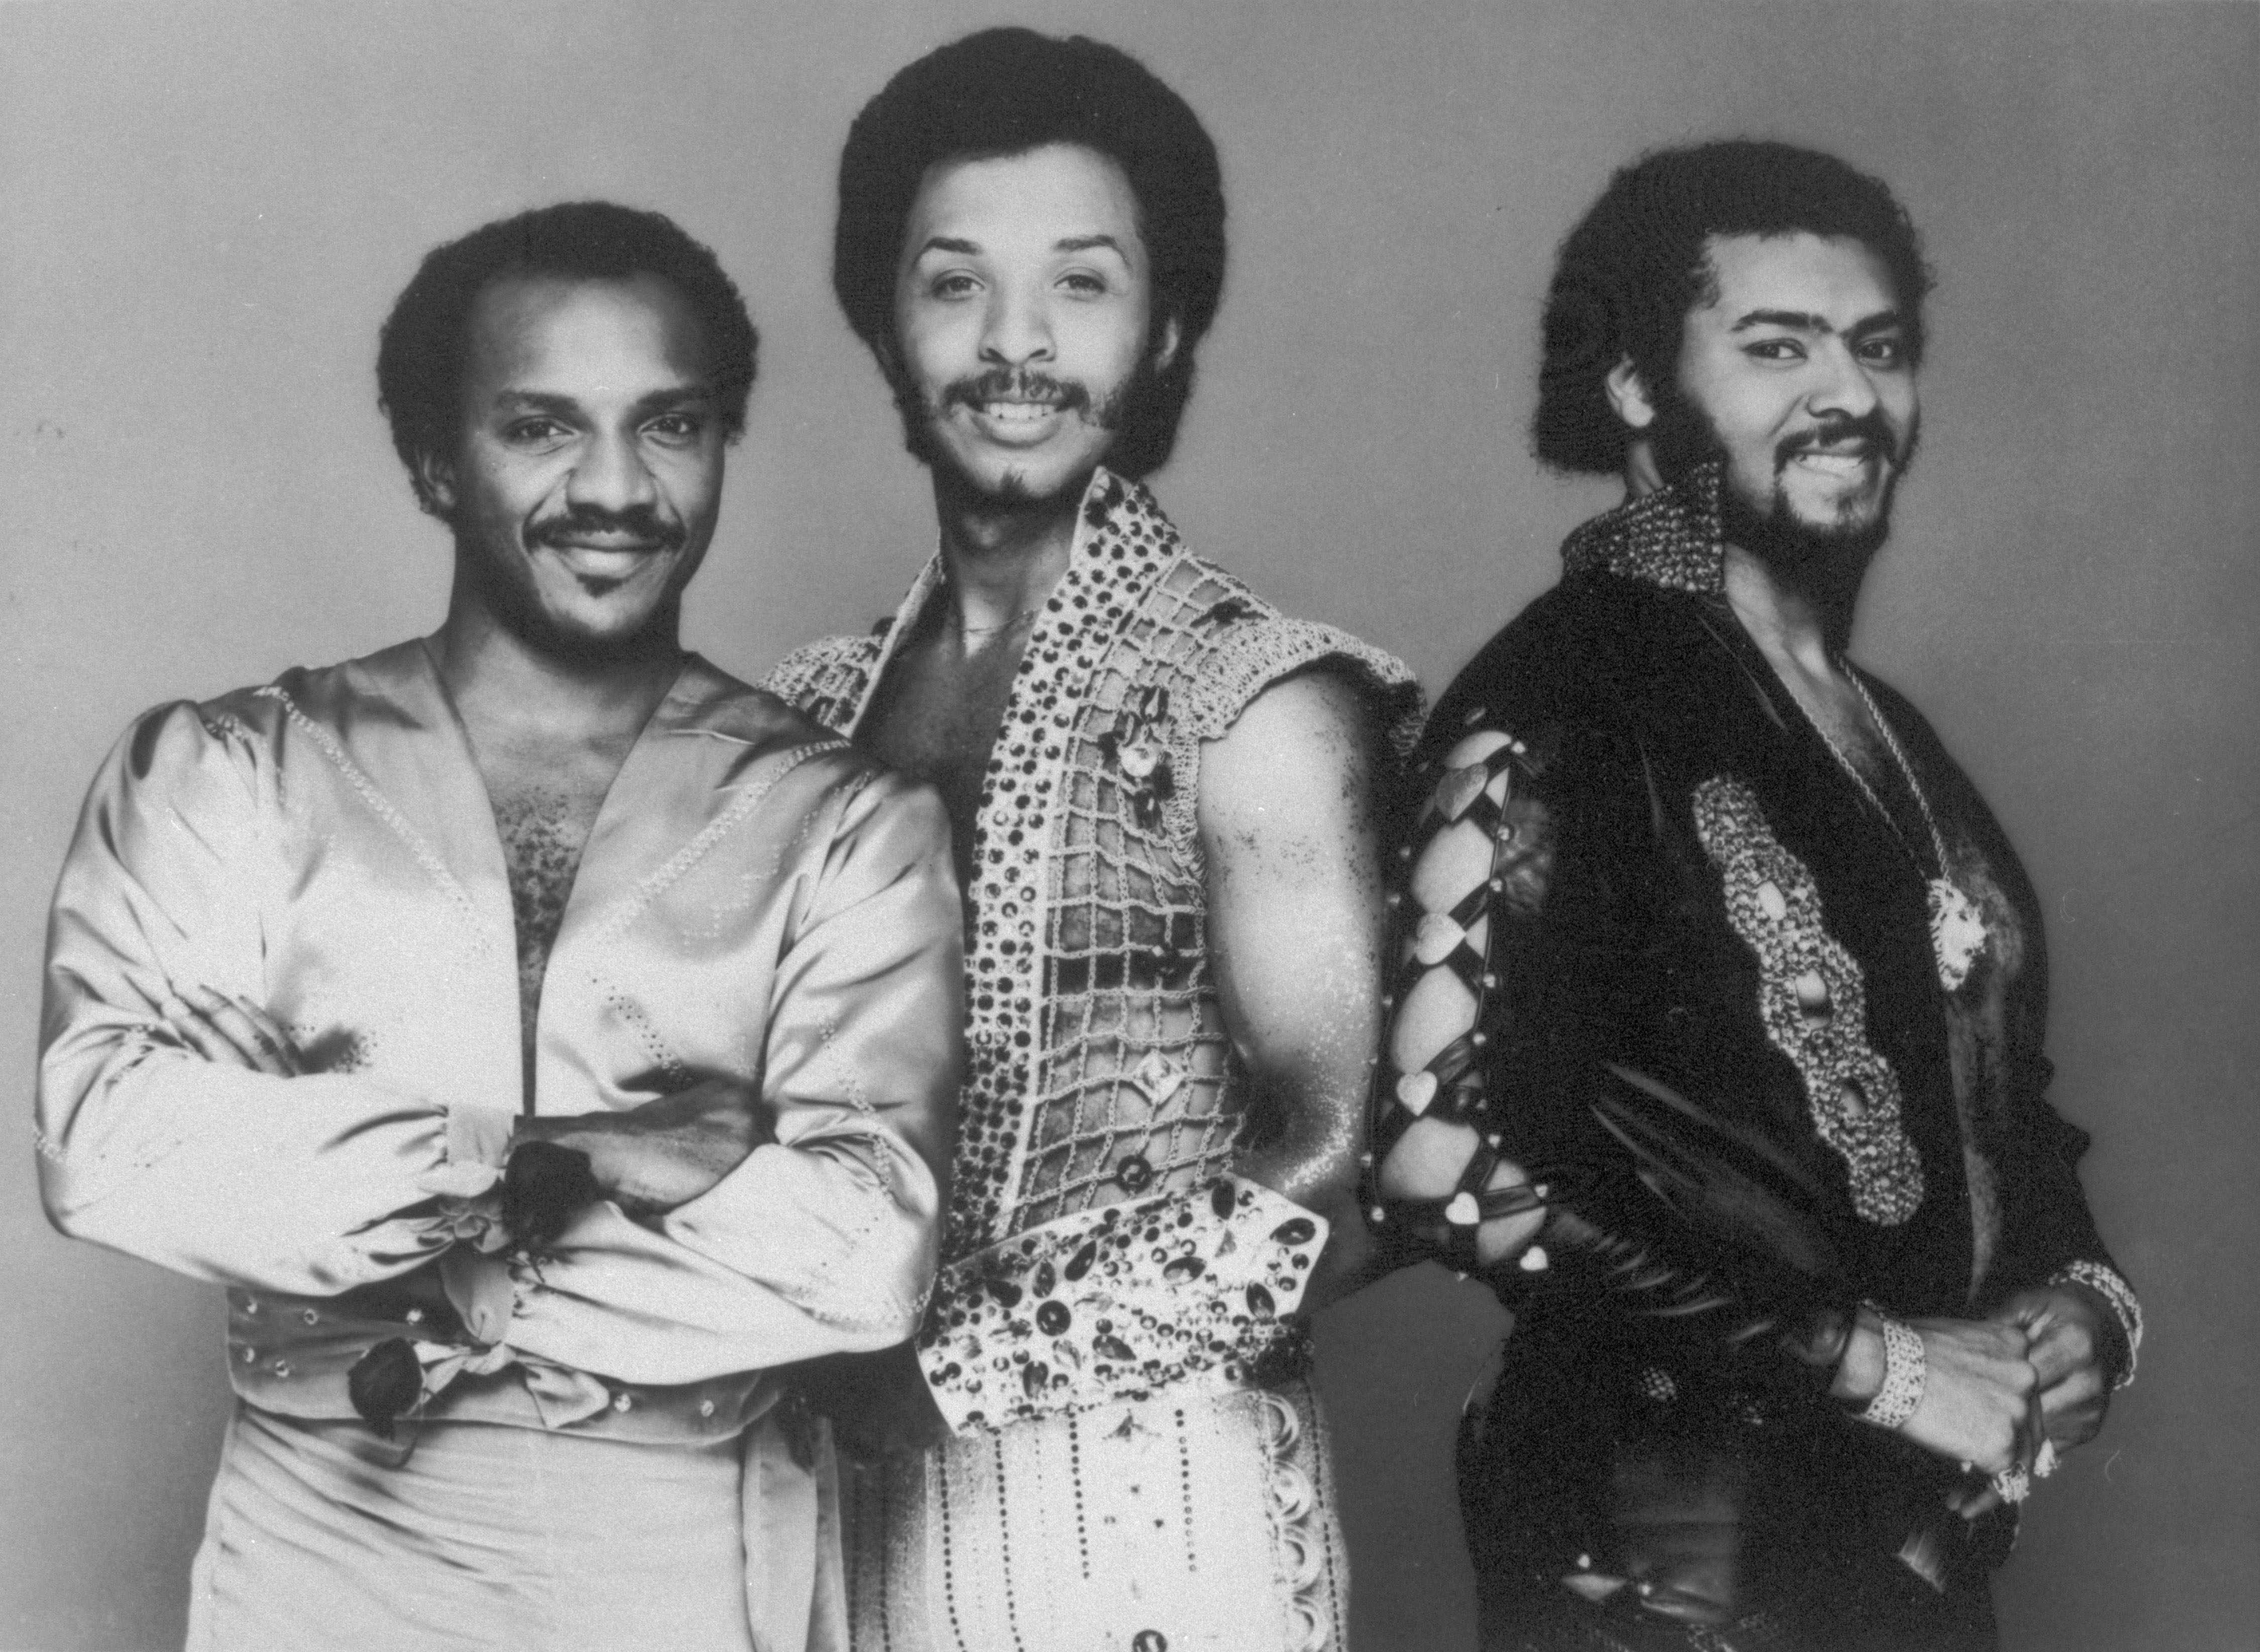 From left: Ernie Isley, Chris Jasper and Marvin Isley